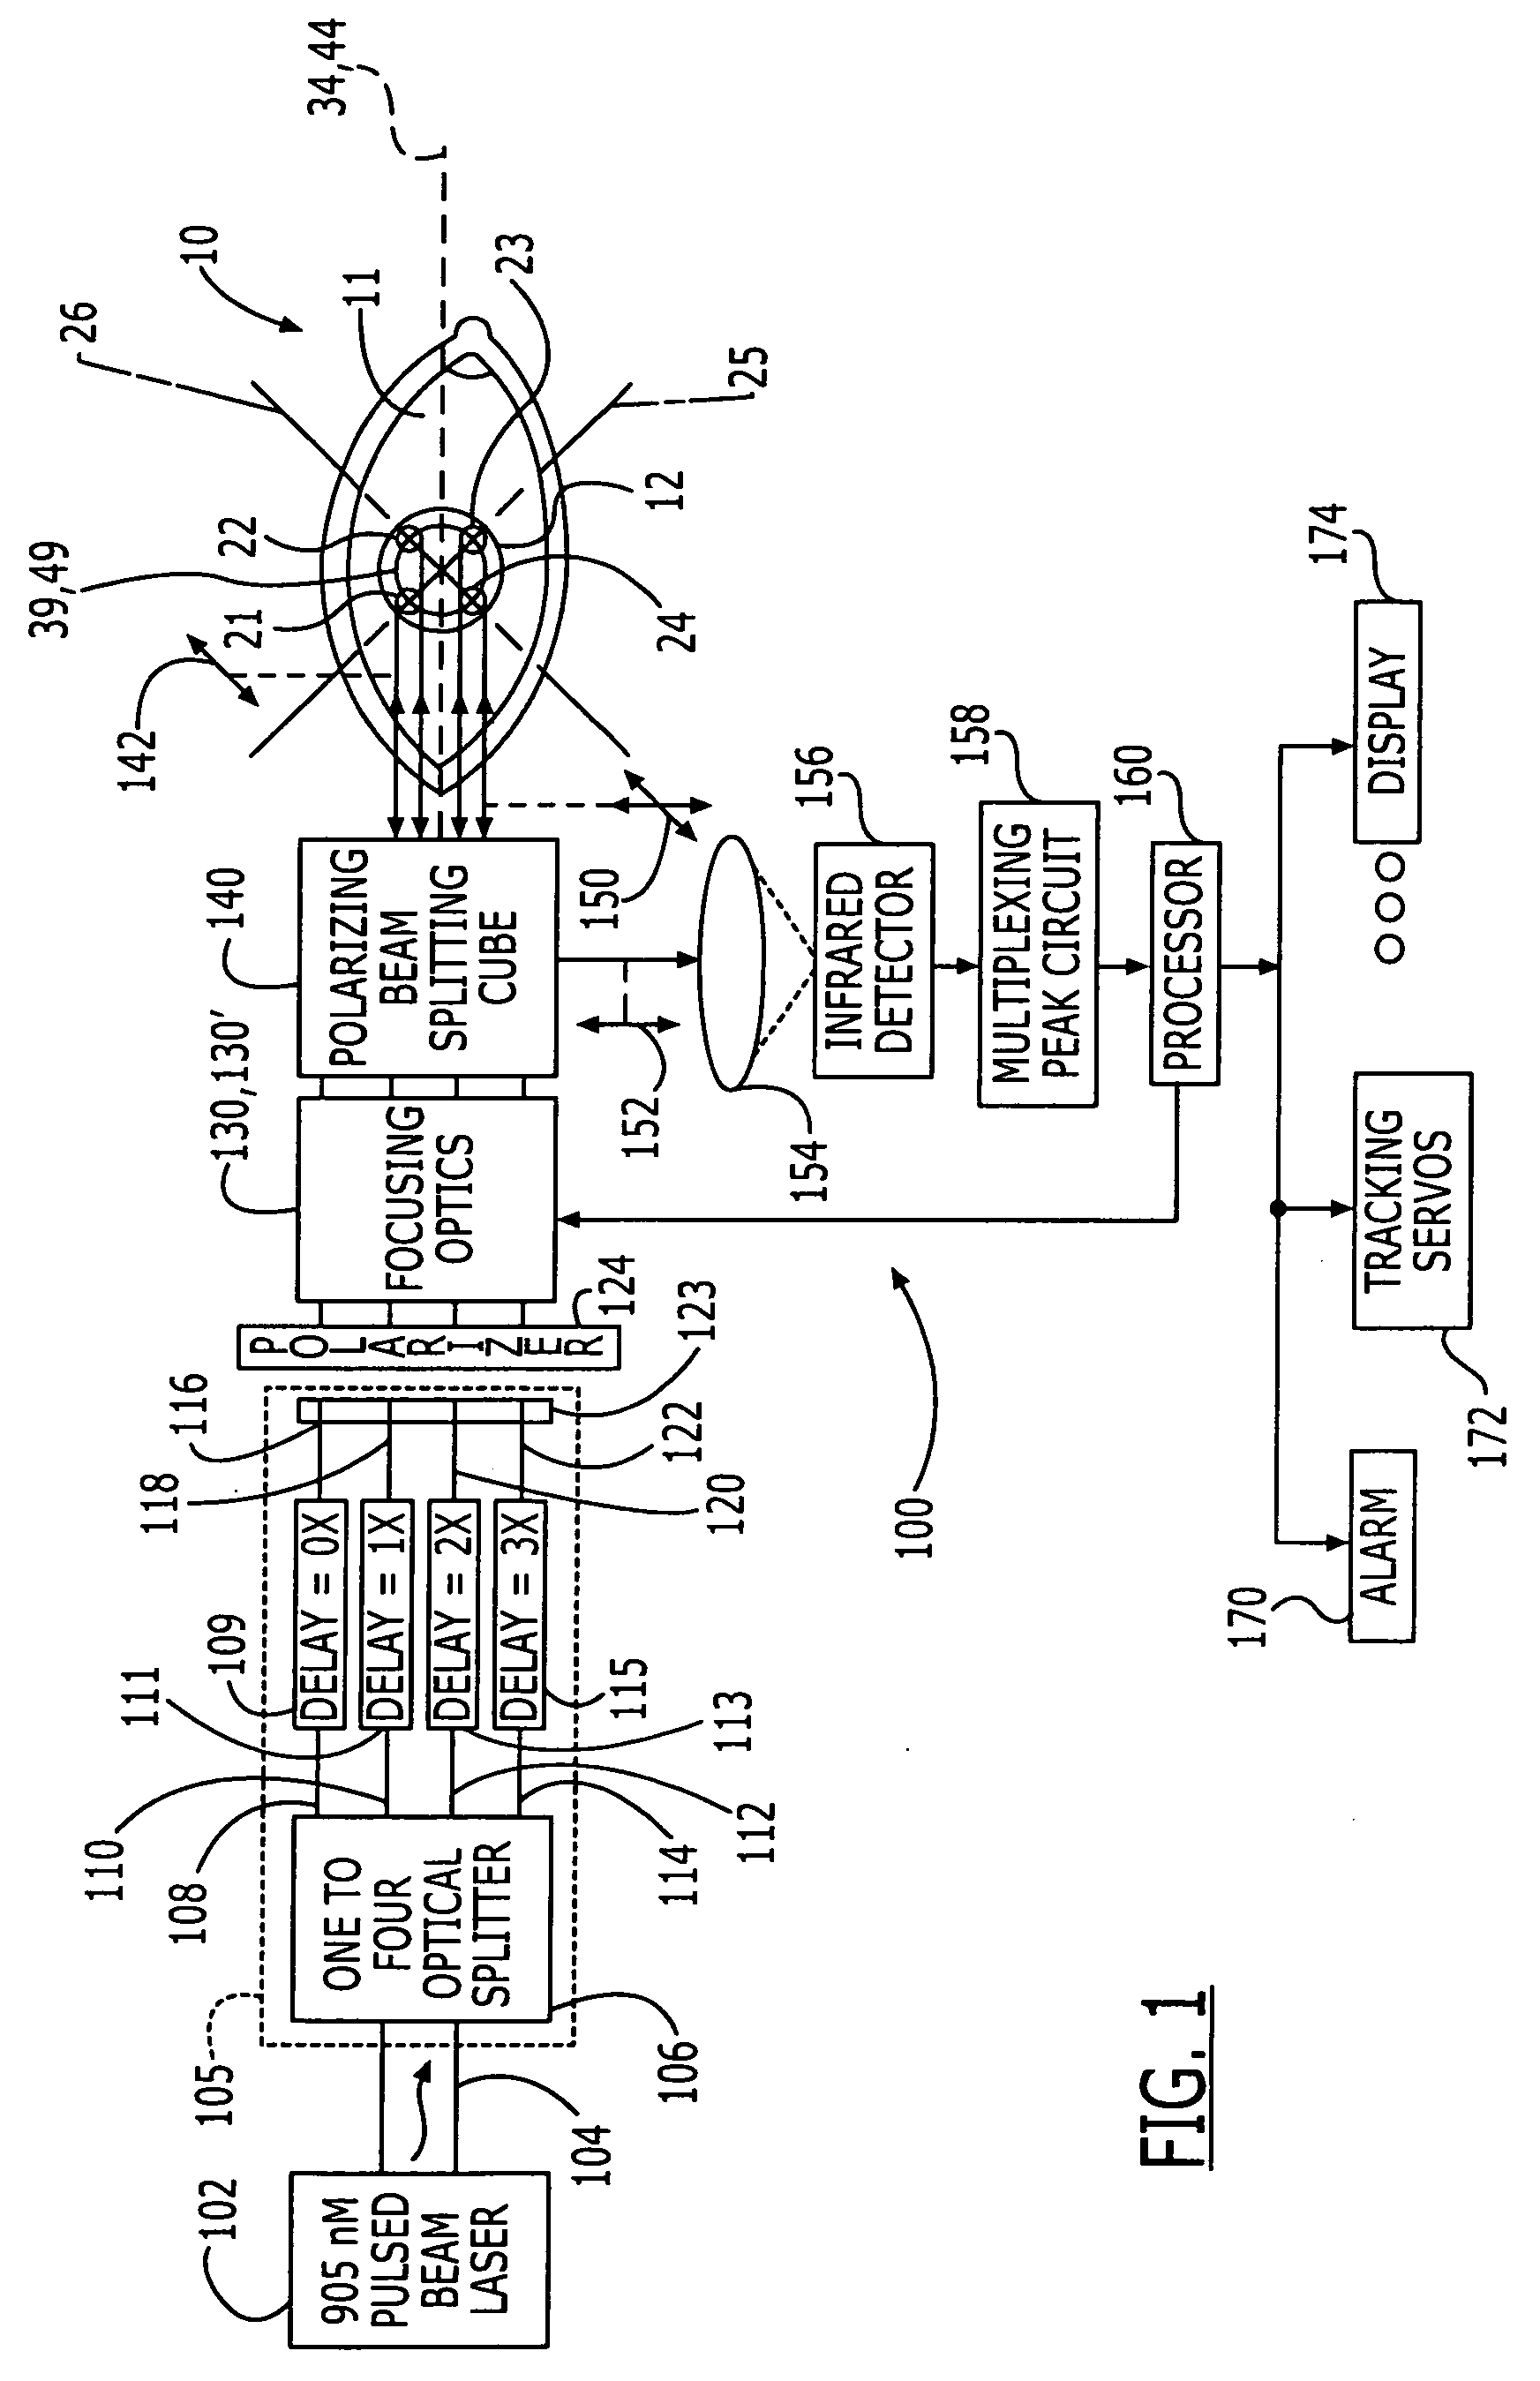 Eye tracker and pupil characteristic measurement system and associated methods